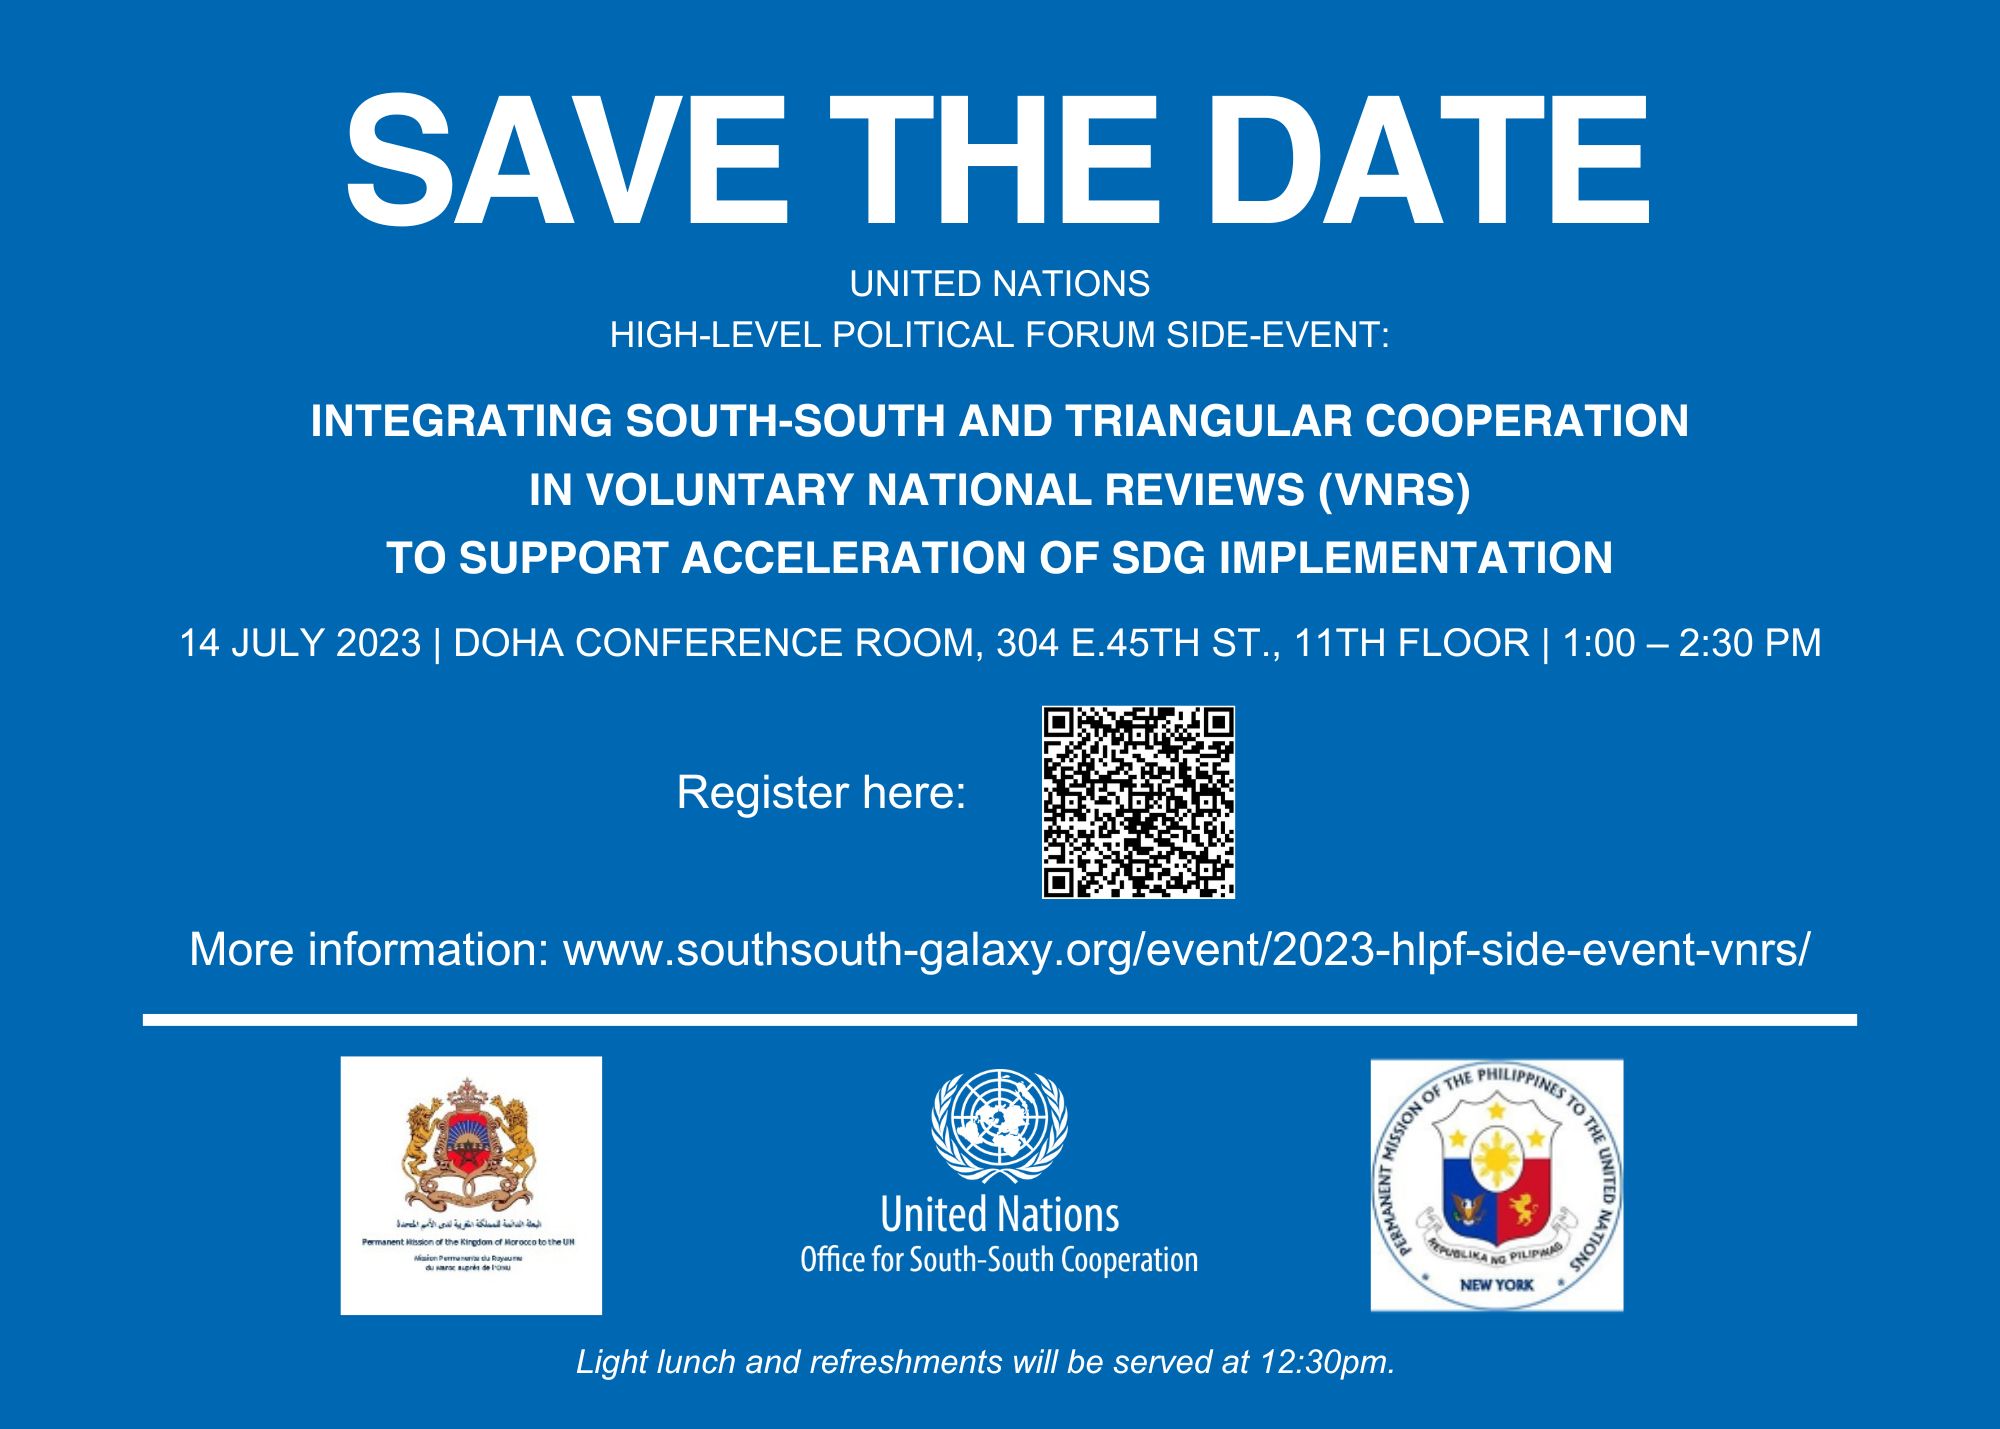 HLPF Side Event: Integrating South-South and Triangular Cooperation in Voluntary National Reviews (VNRs) to Support Acceleration of the SDGs Implementation, 14 July 2023